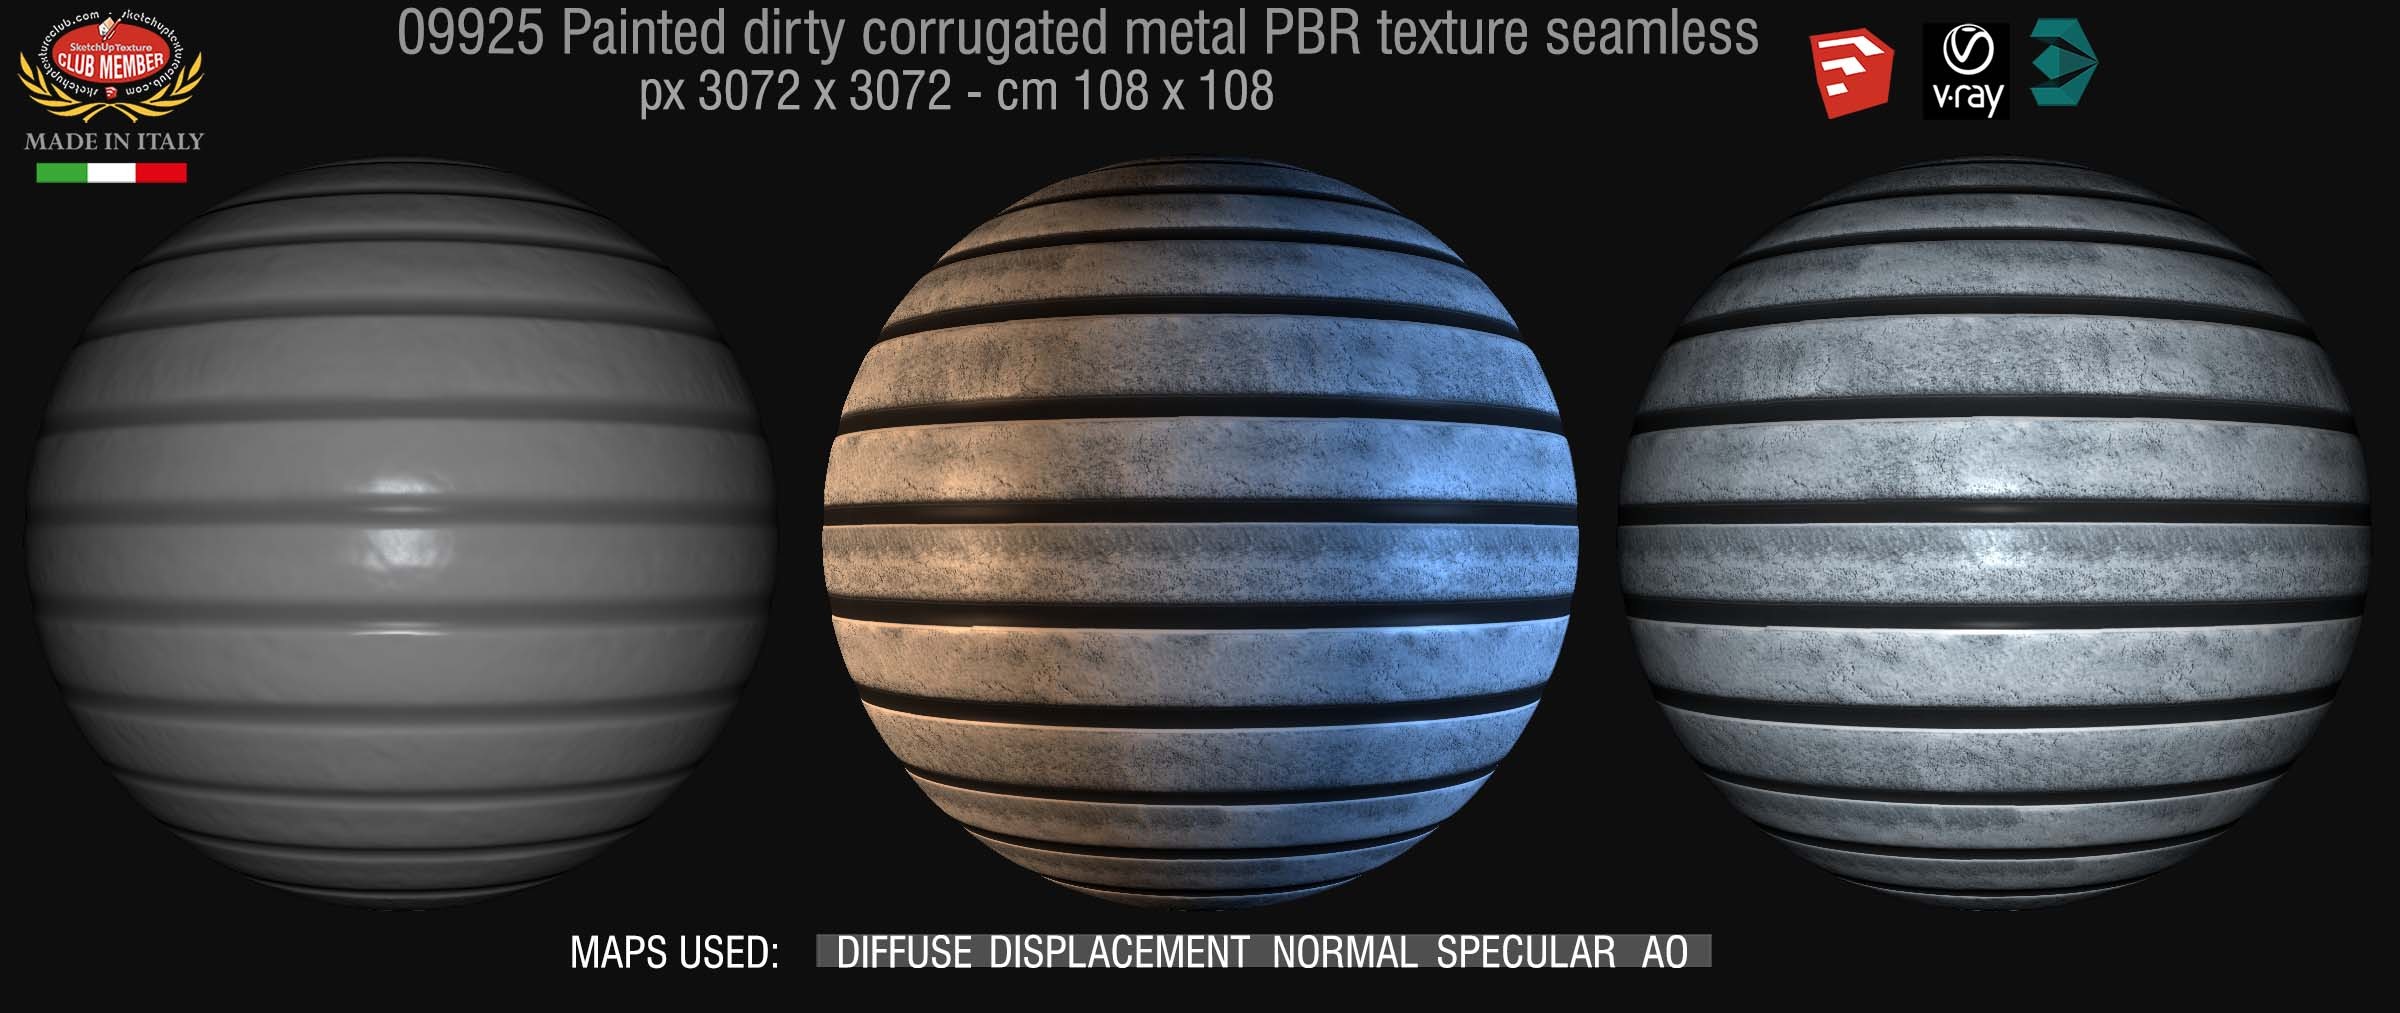 09925 Painted dirty corrugated metal PBR texture seamless DEMO